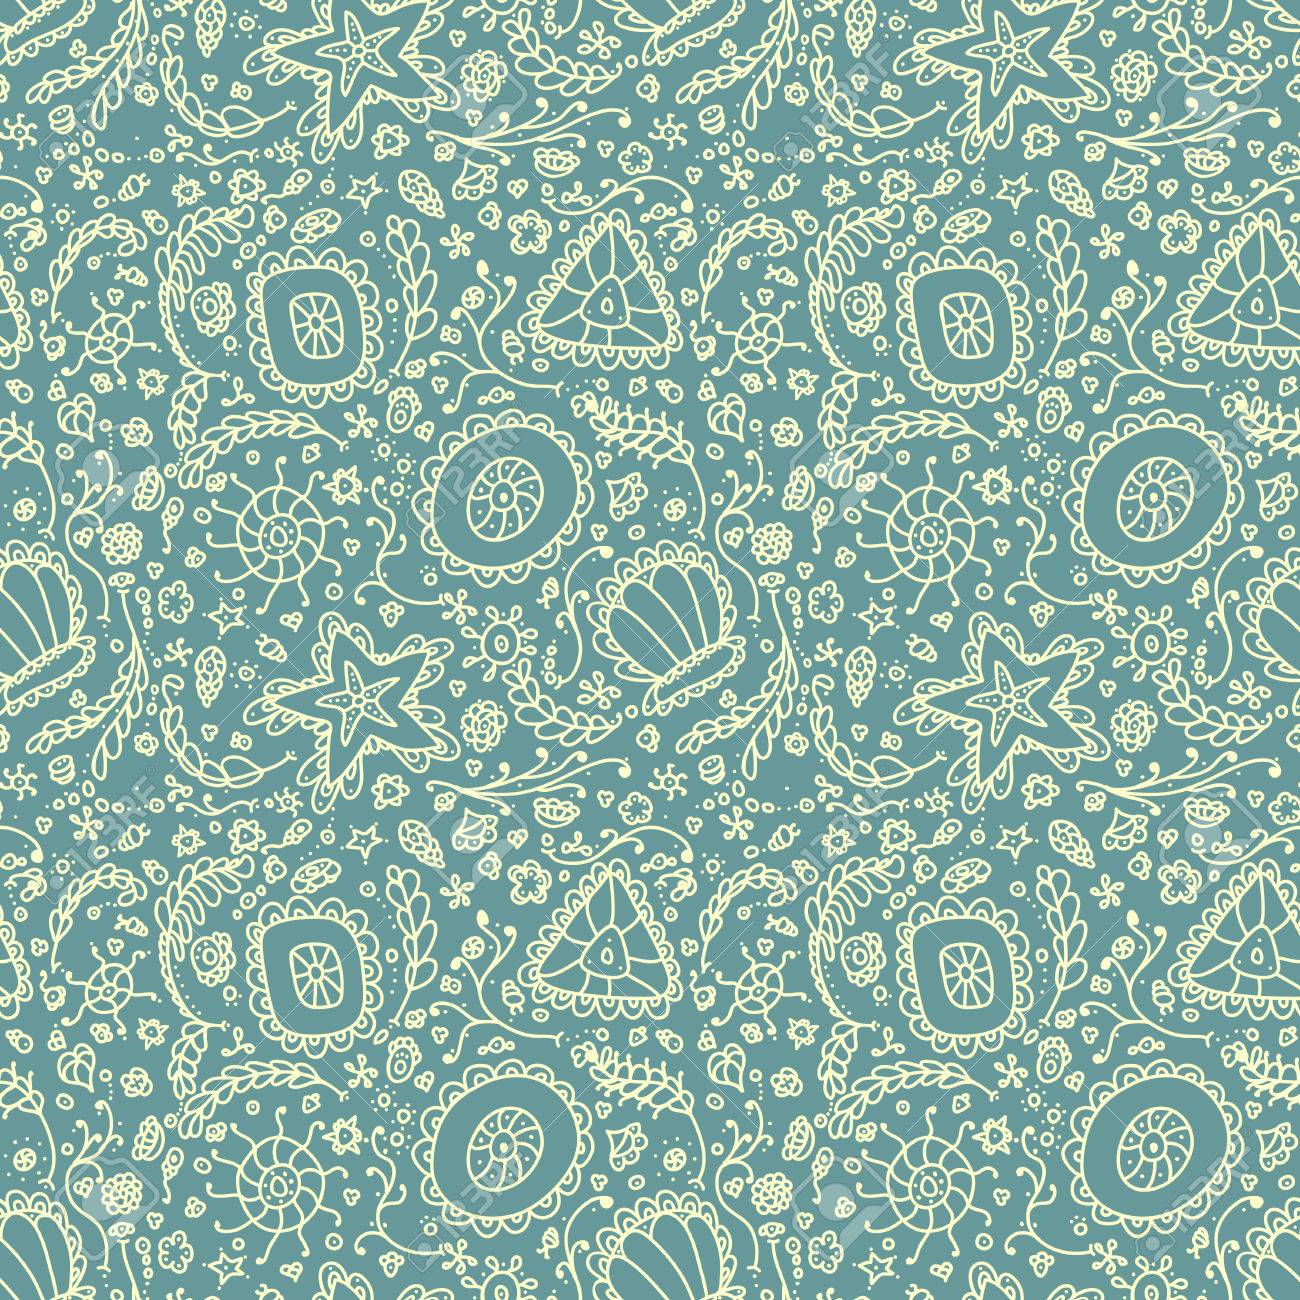 Handmade Seamless Pattern Or Background With Abstract Protozoa